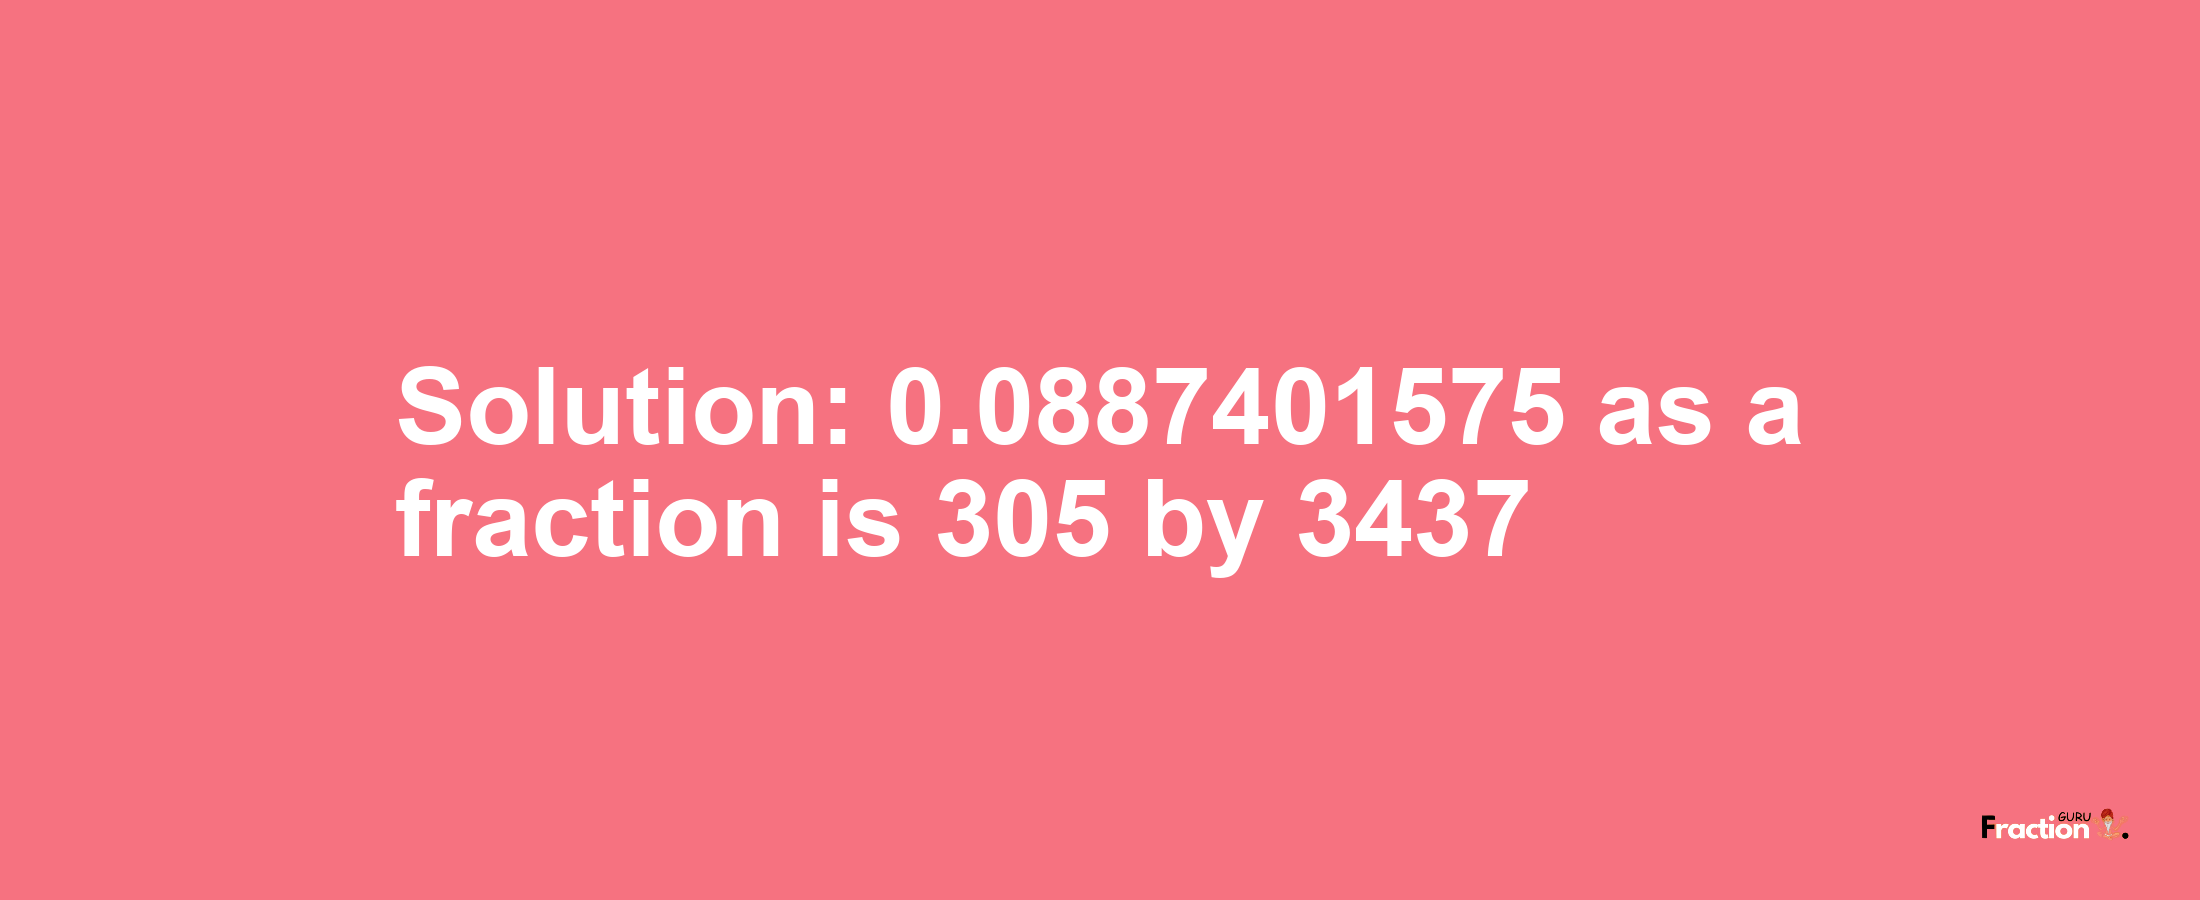 Solution:0.0887401575 as a fraction is 305/3437